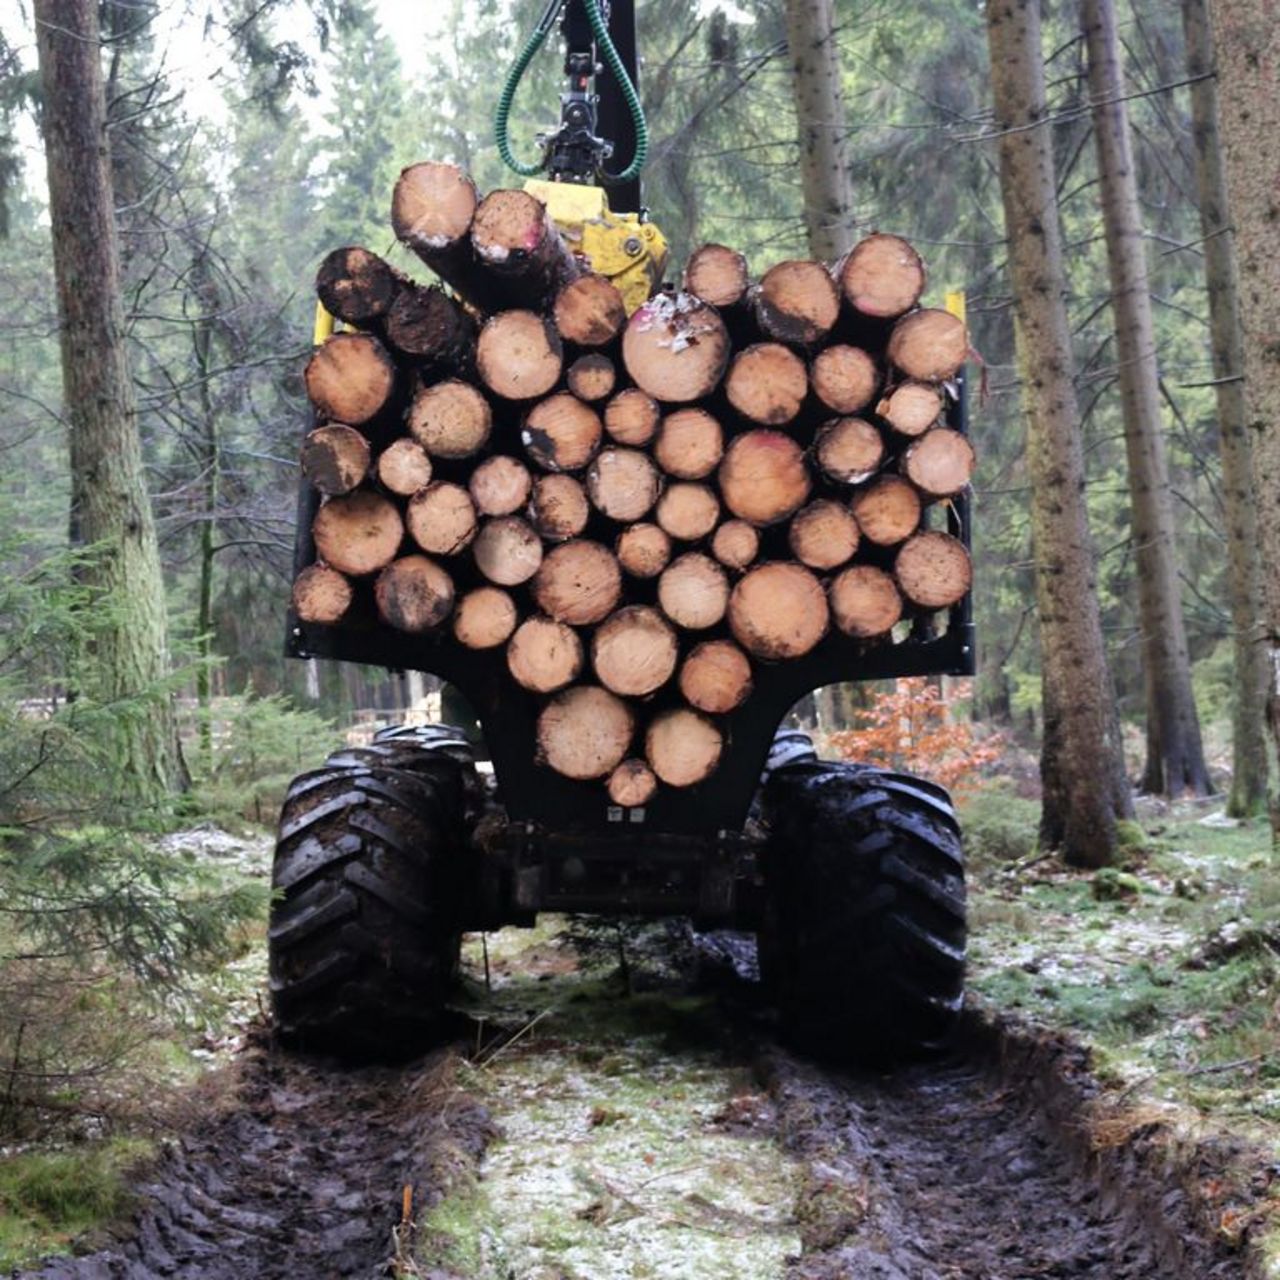 Loaded forwarder of the project attempts to drive in Solling (December 2017)